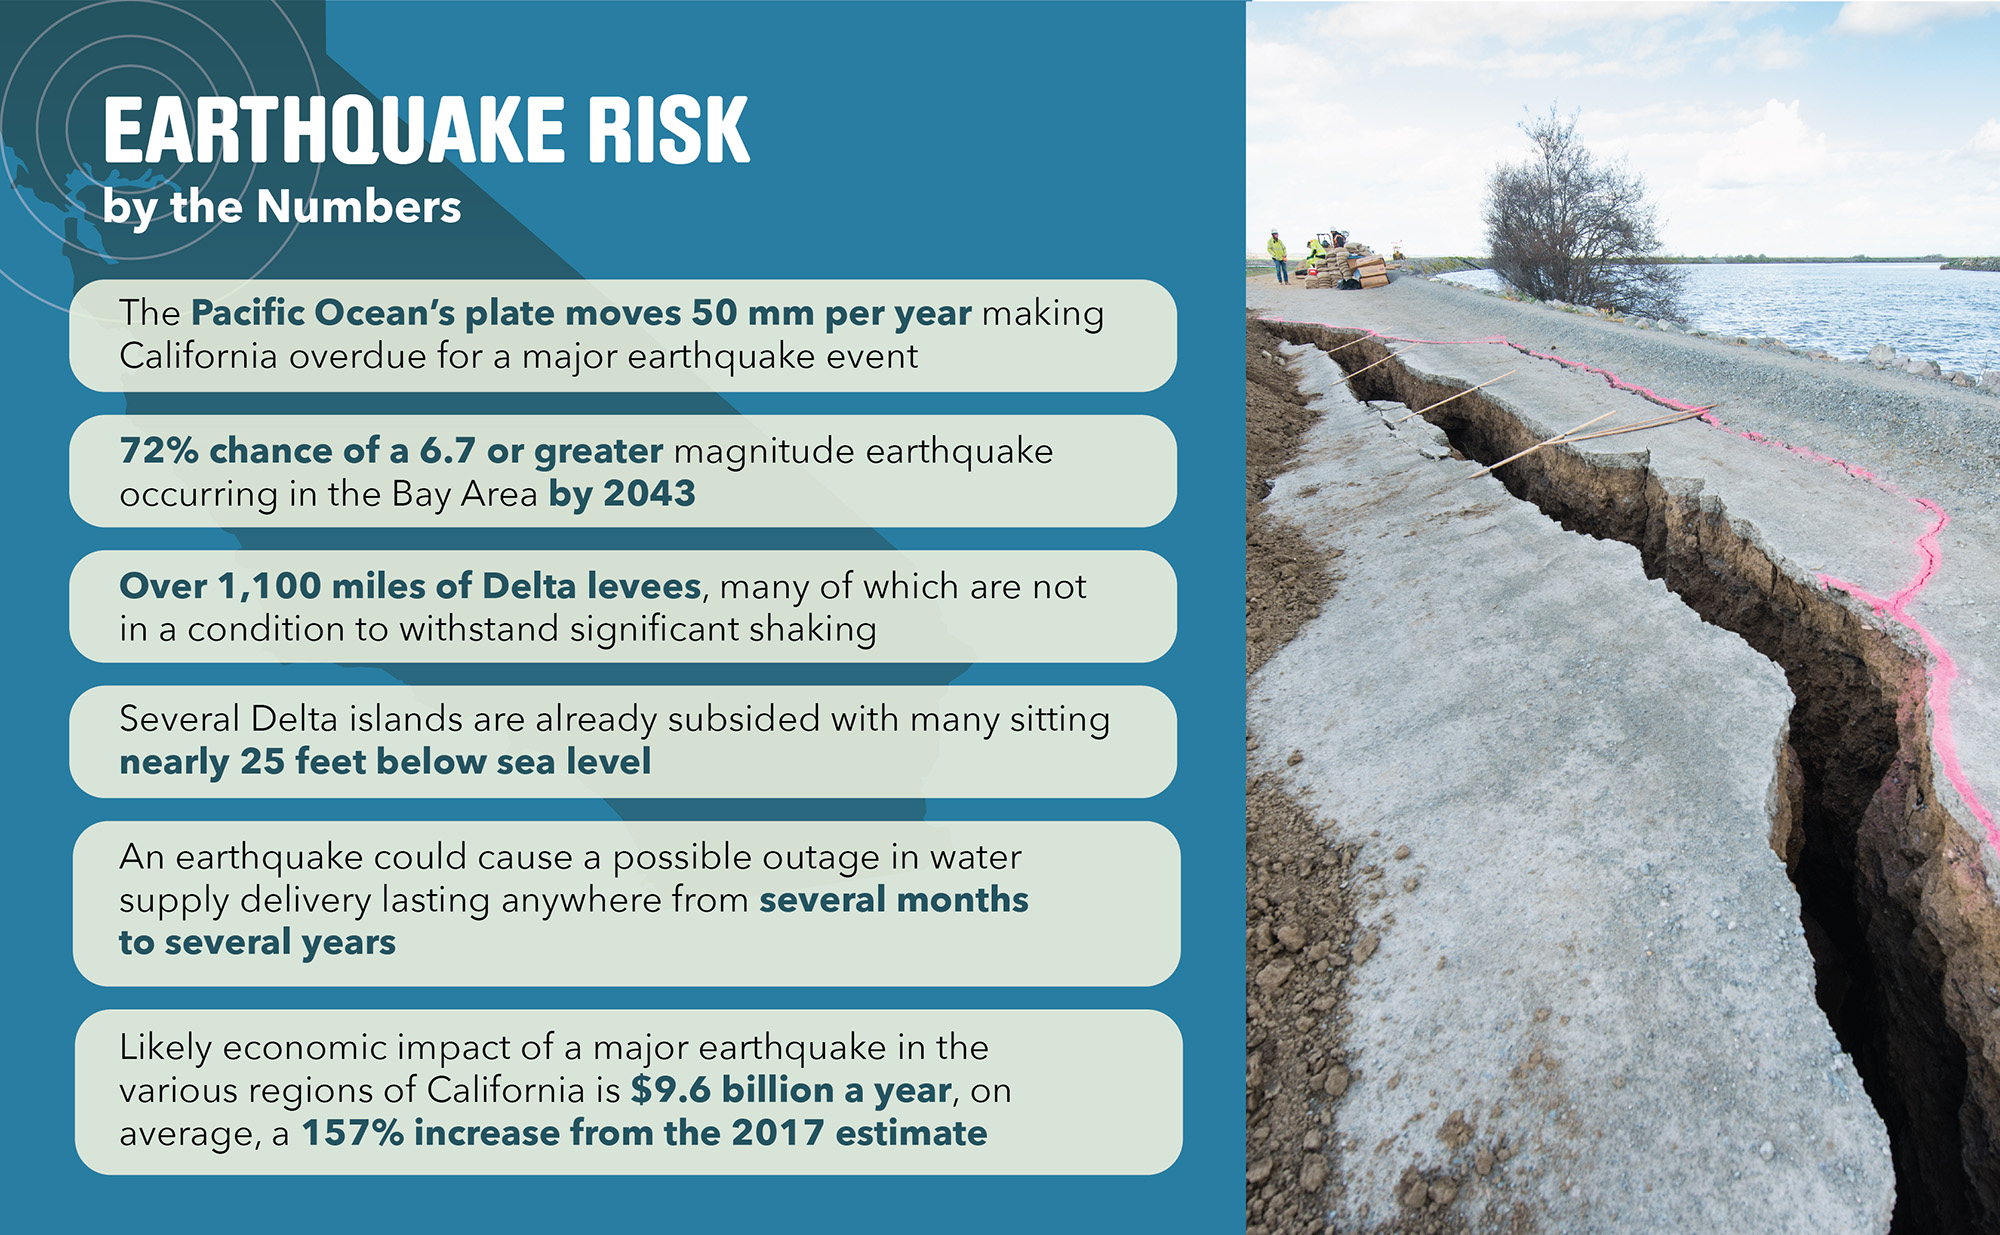 How The Delta Conveyance Project Would Make California’s Water Supply More Resilient Against Earthquakes